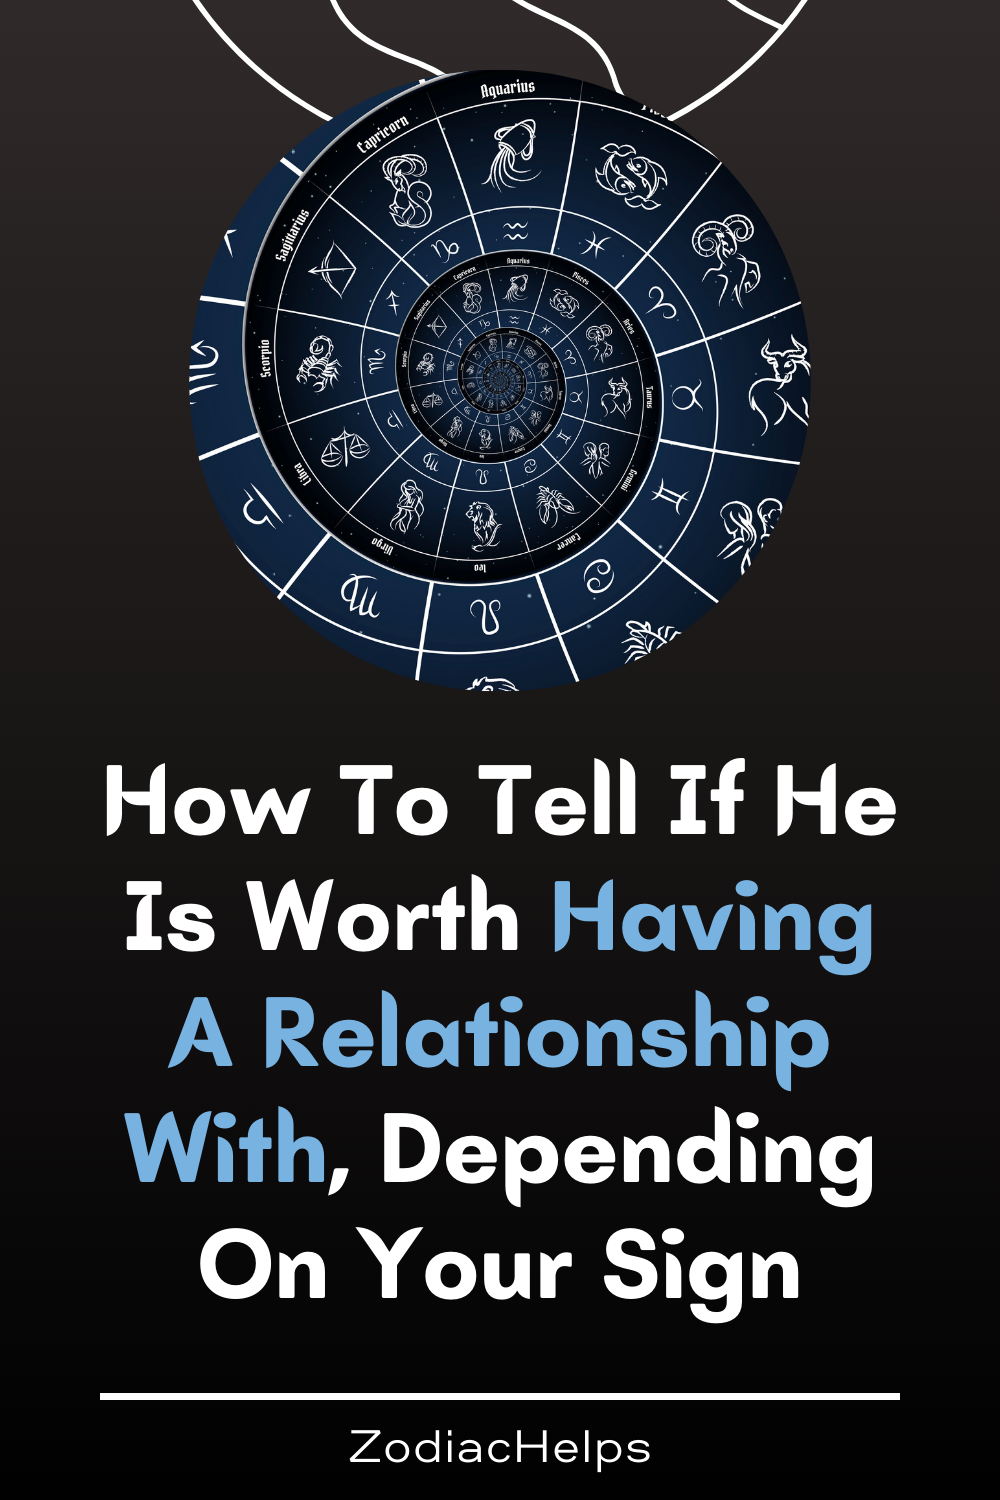 How To Tell If He Is Worth Having A Relationship With, Depending On Your Sign